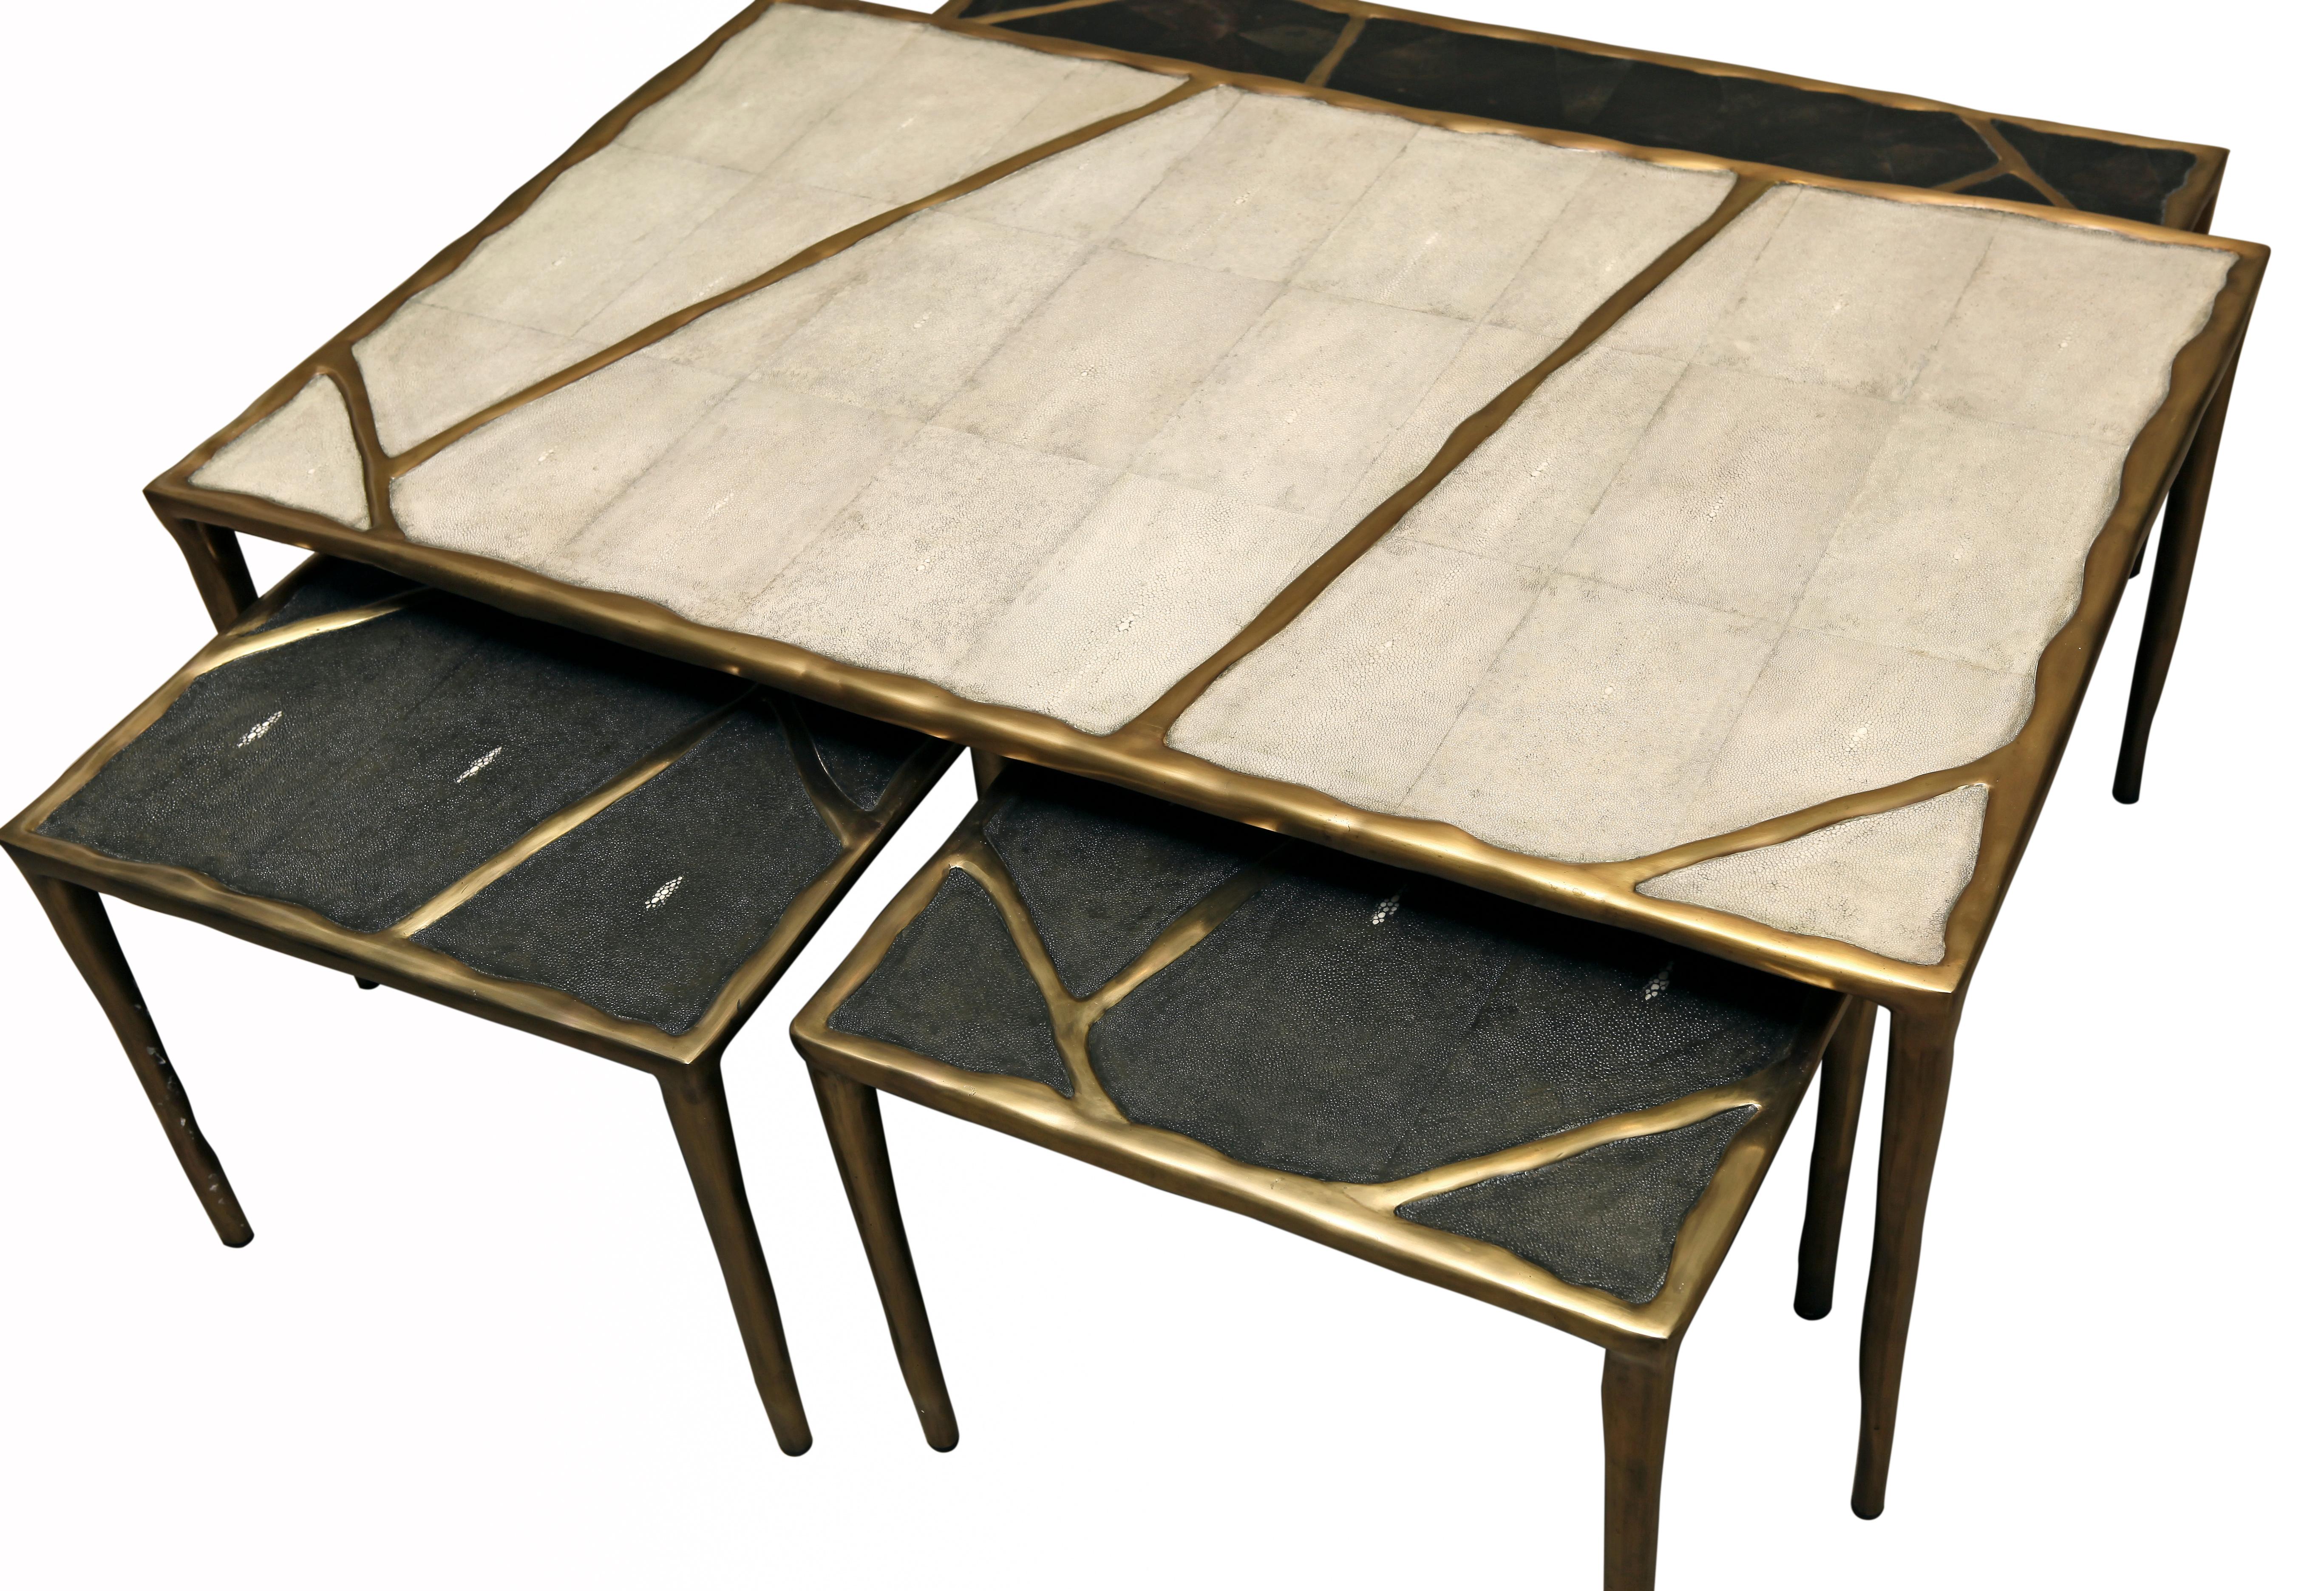 The melting nesting coffee tables are sold as a set of 4, the large is inlaid in cream shagreen, the medium in black pen shell, and the two small sizes in coal black shagreen. These pieces have a bronze-patina brass pattern that 